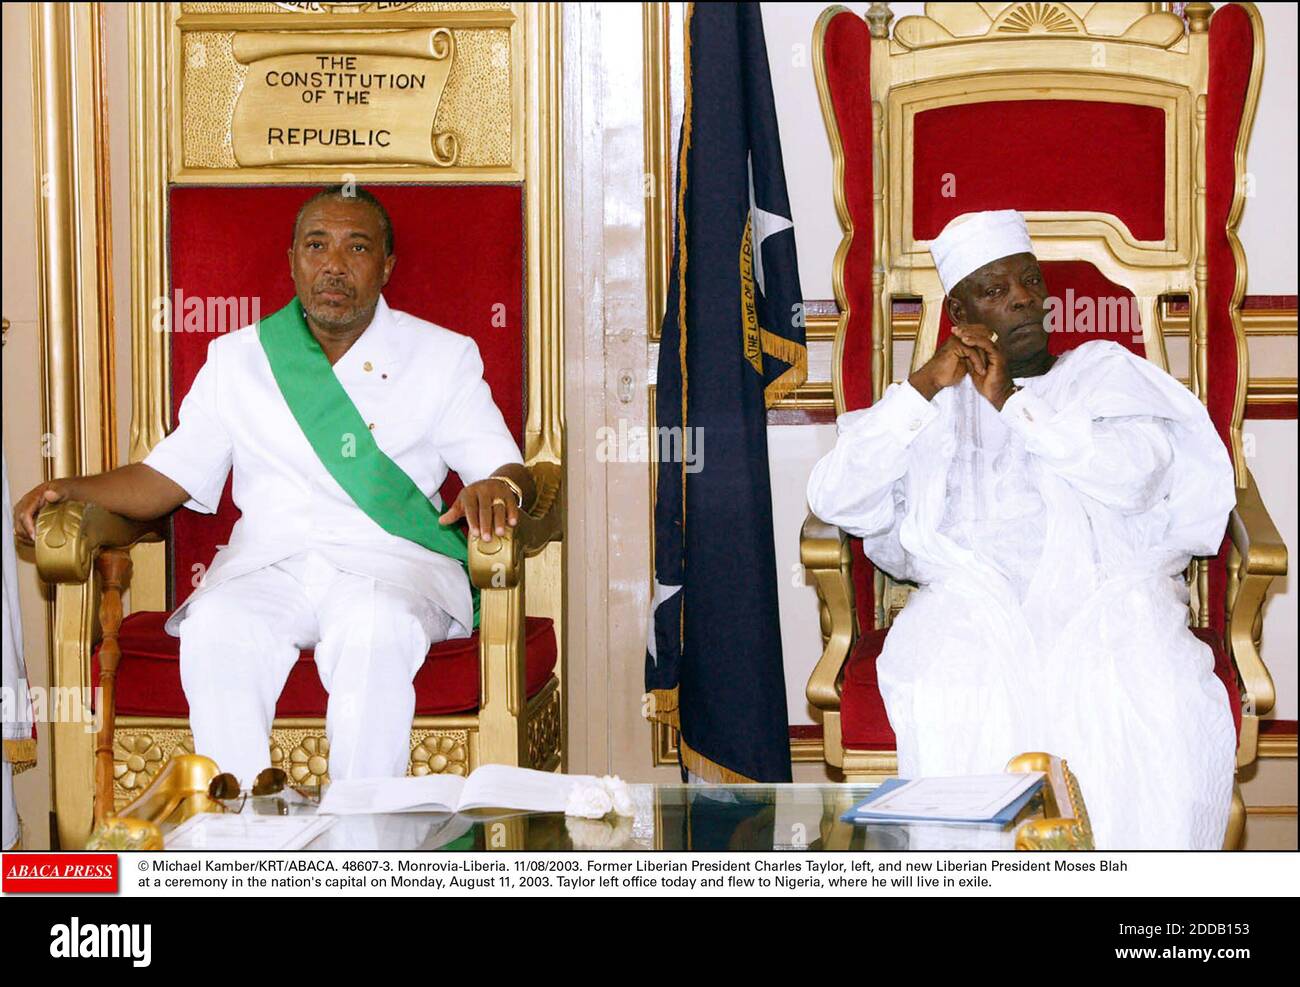 NO FILM, NO VIDEO, NO TV, NO DOCUMENTARY - © Michael Kamber/KRT/ABACA. 48607-3. Monrovia-Liberia. 11/08/2003. Former Liberian President Charles Taylor, left, and new Liberian President Moses Blah at a ceremony in the nation's capital on Monday, August 11, 2003. Taylor left office today and flew to Stock Photo